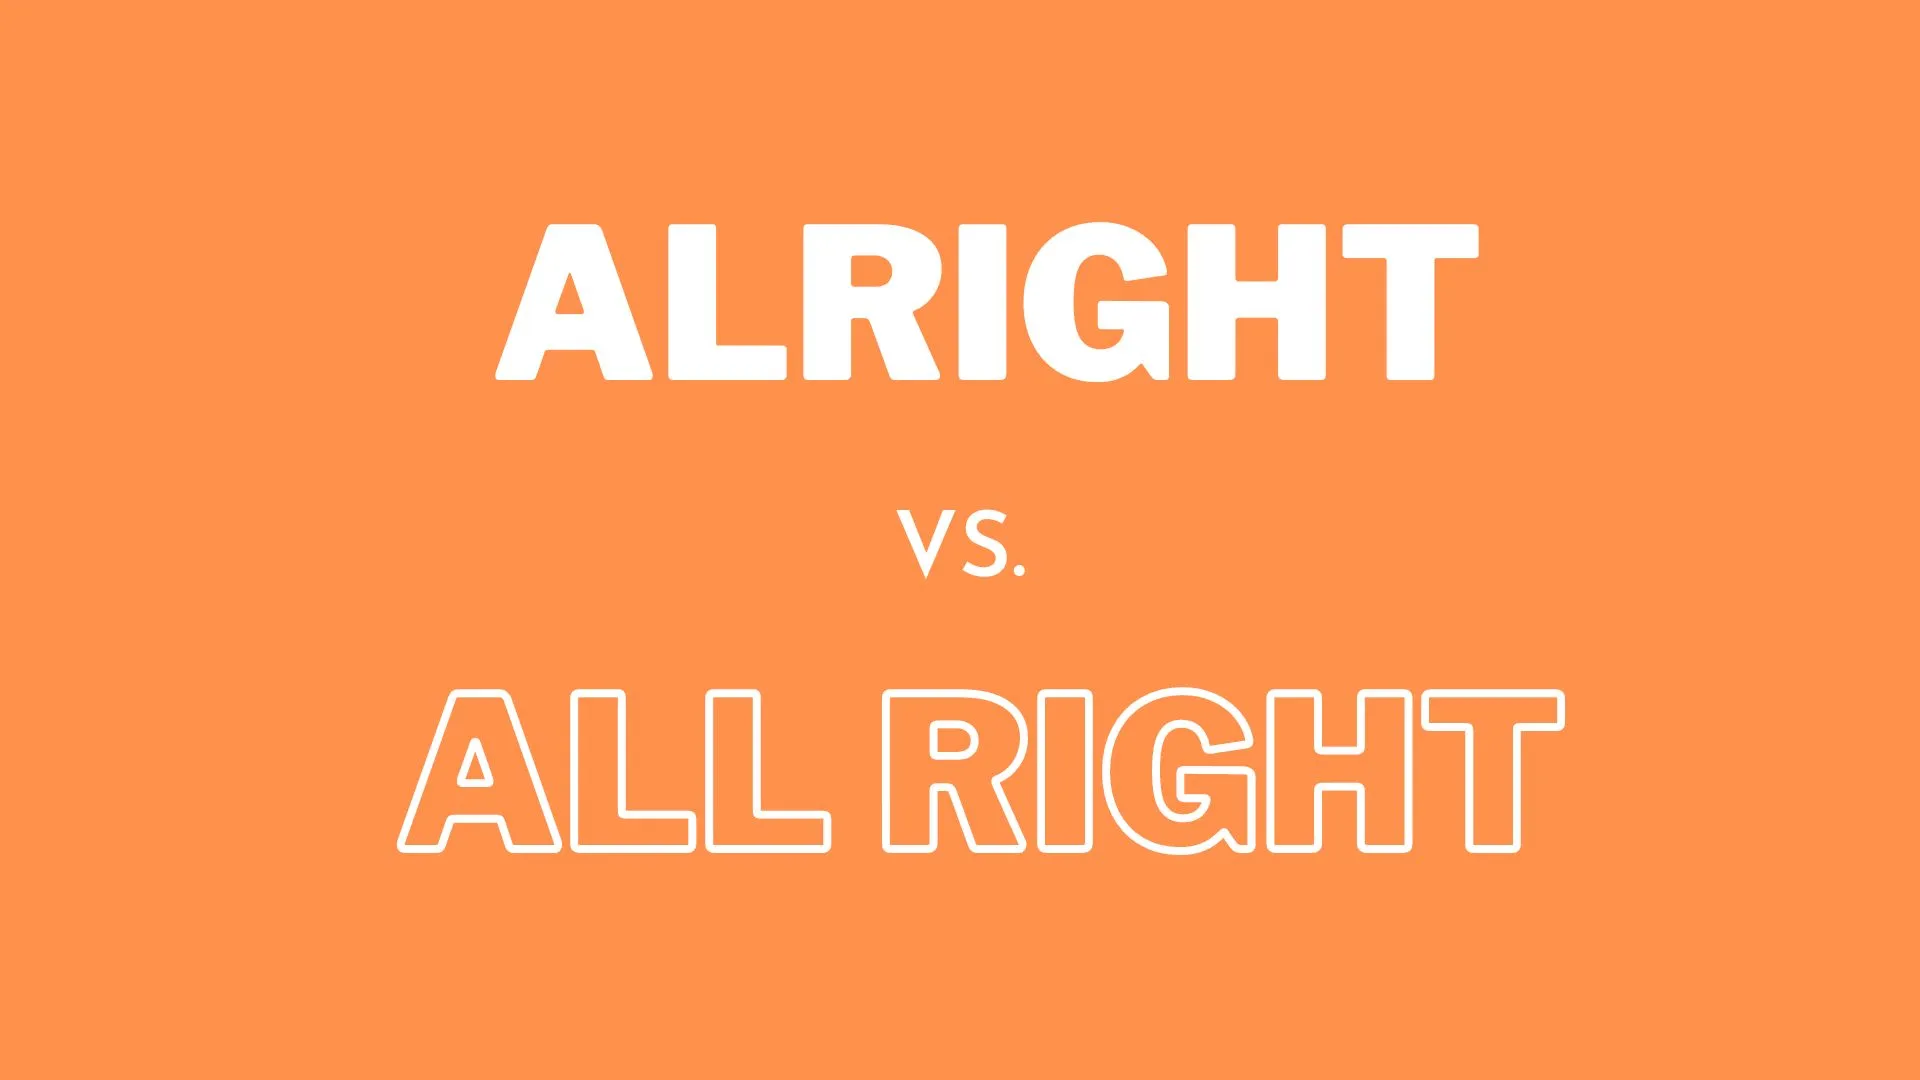 Discover what the difference between "all right" and "alright" is and when to use each—with examples.